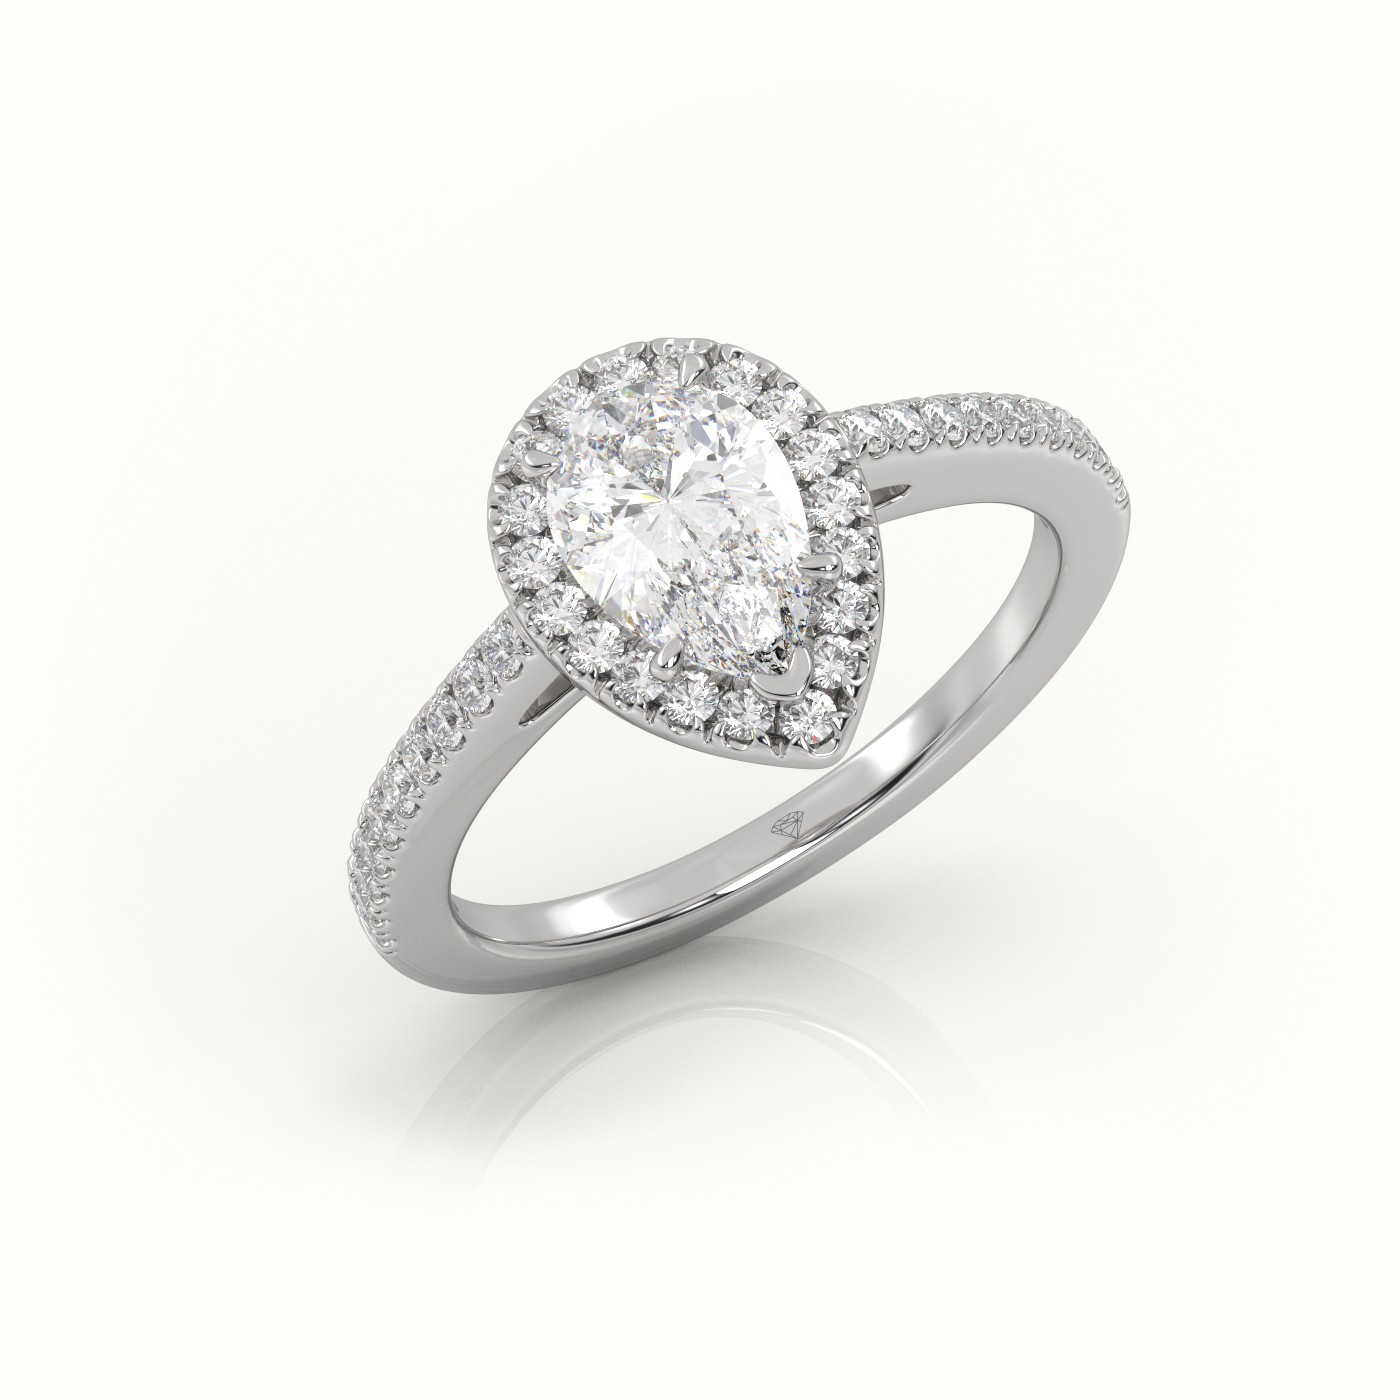 18K WHITE GOLD PEAR CUT DIAMOND HALO PAVE SETTING ENGAGEMENT RING